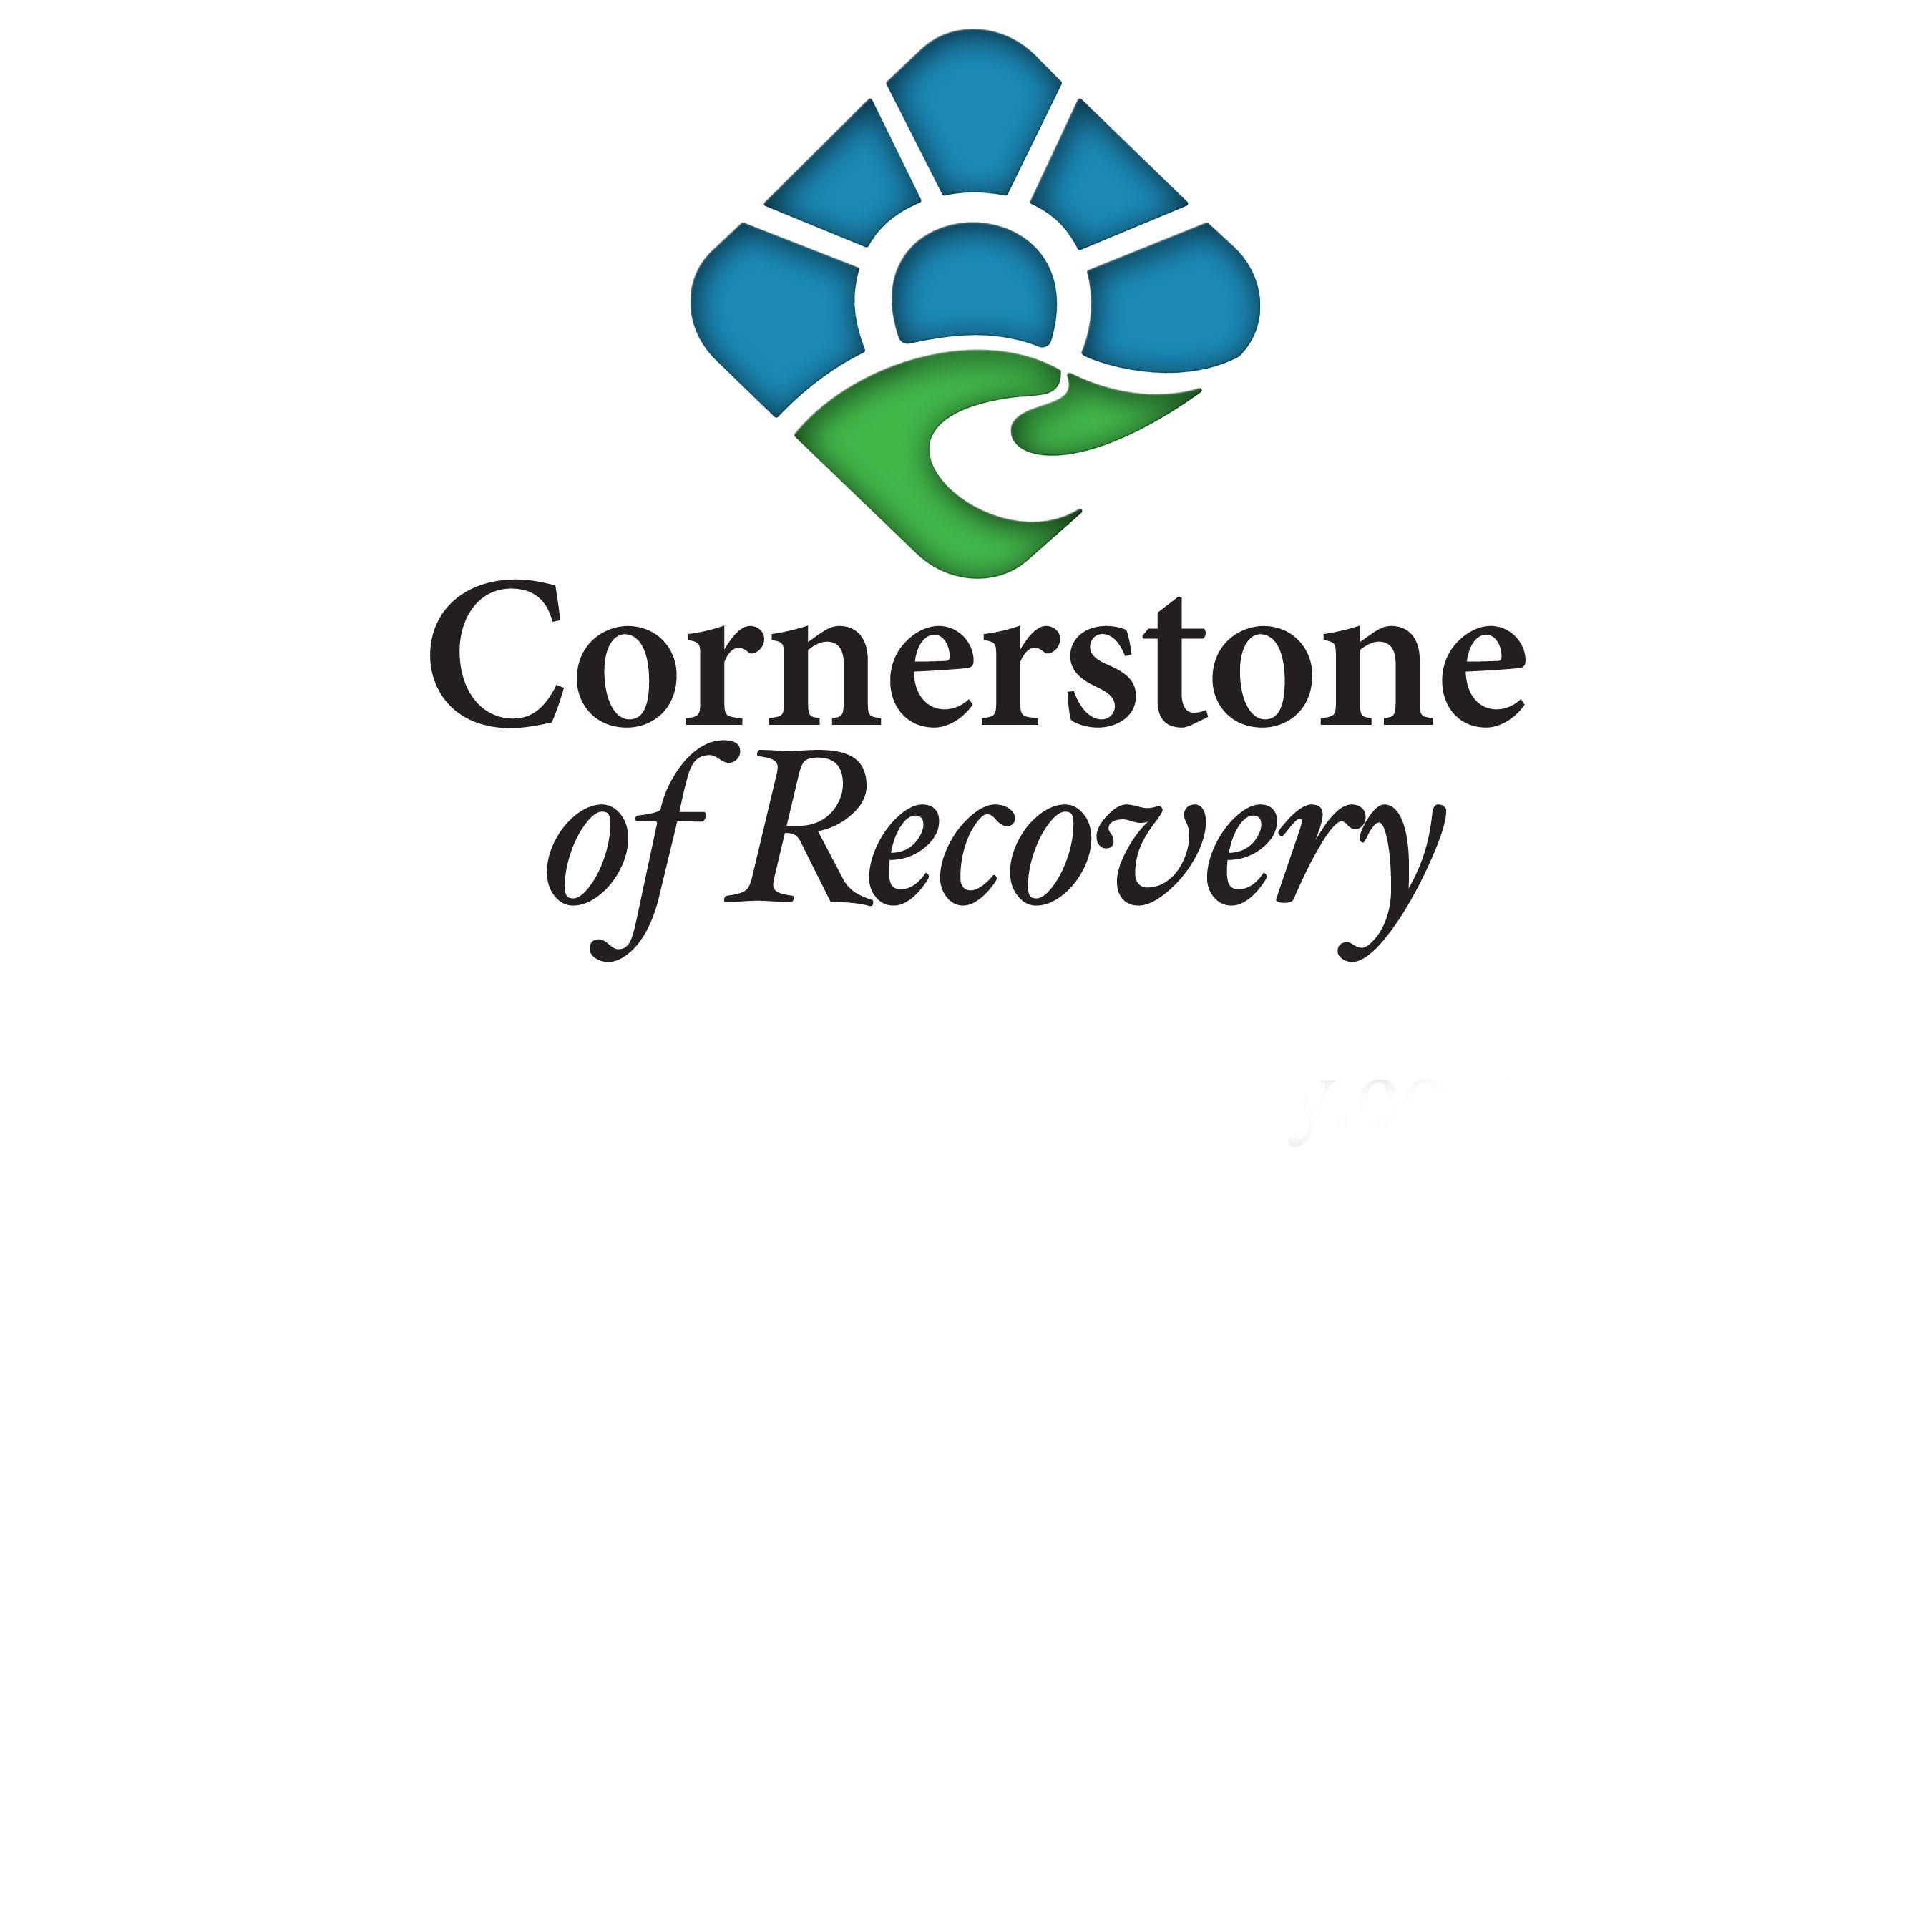 Recovering Logo - For recovering addicts and alcoholics, the holidays can be stressful ...